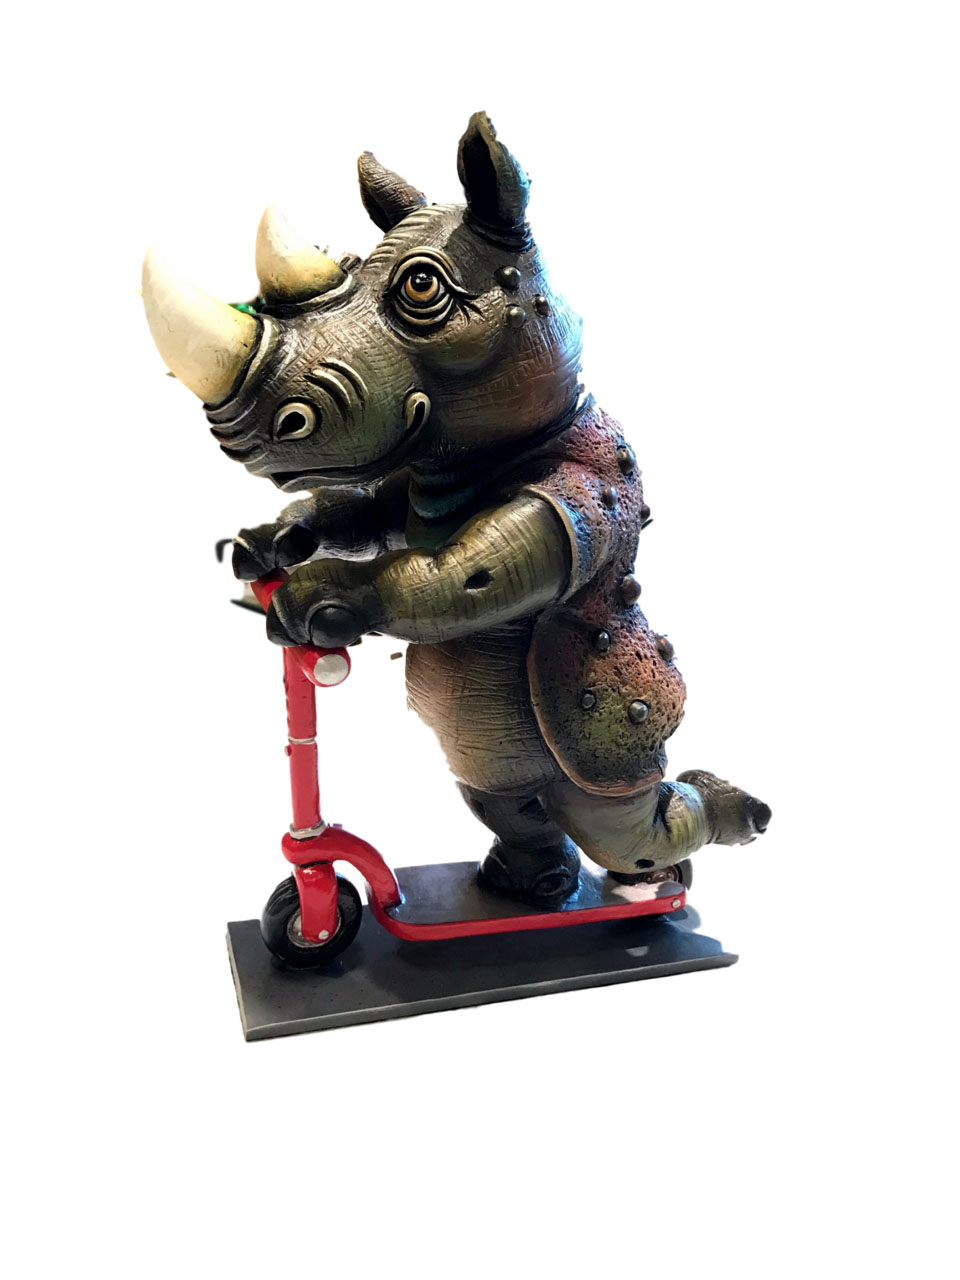 Signed, limited edition rhino sculpture